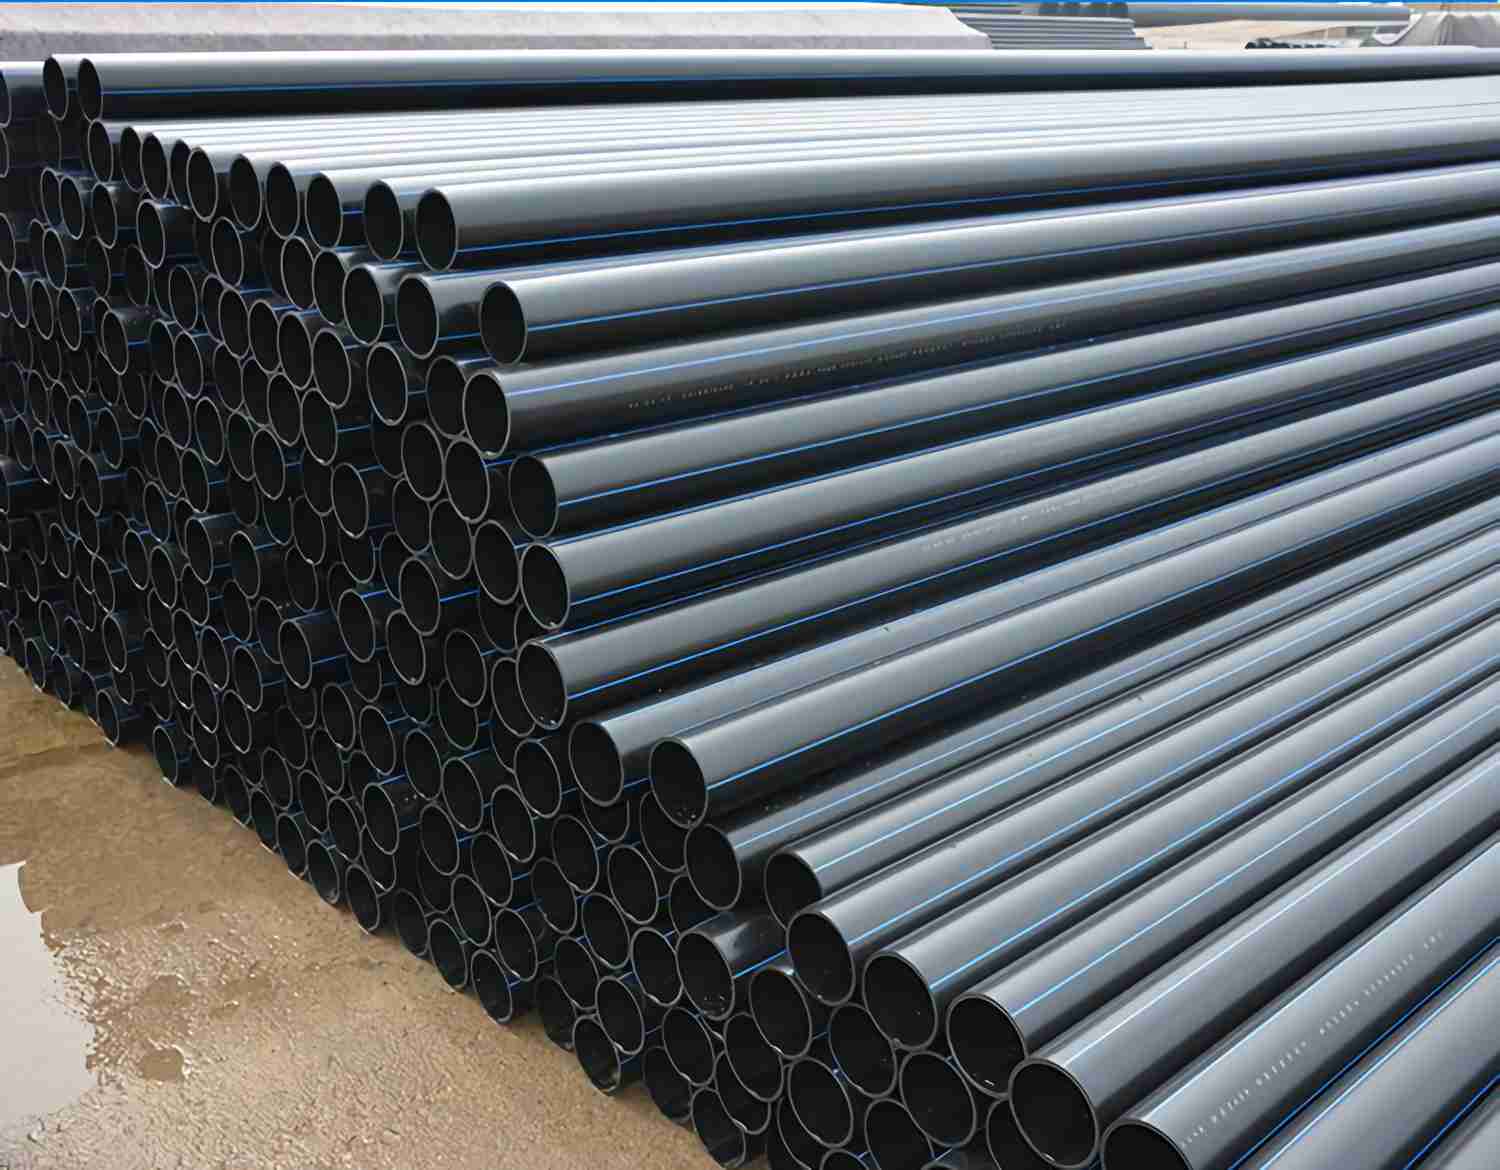 HDPE Water Supply Pipes: Reliable Solutions for Modern Infrastructure